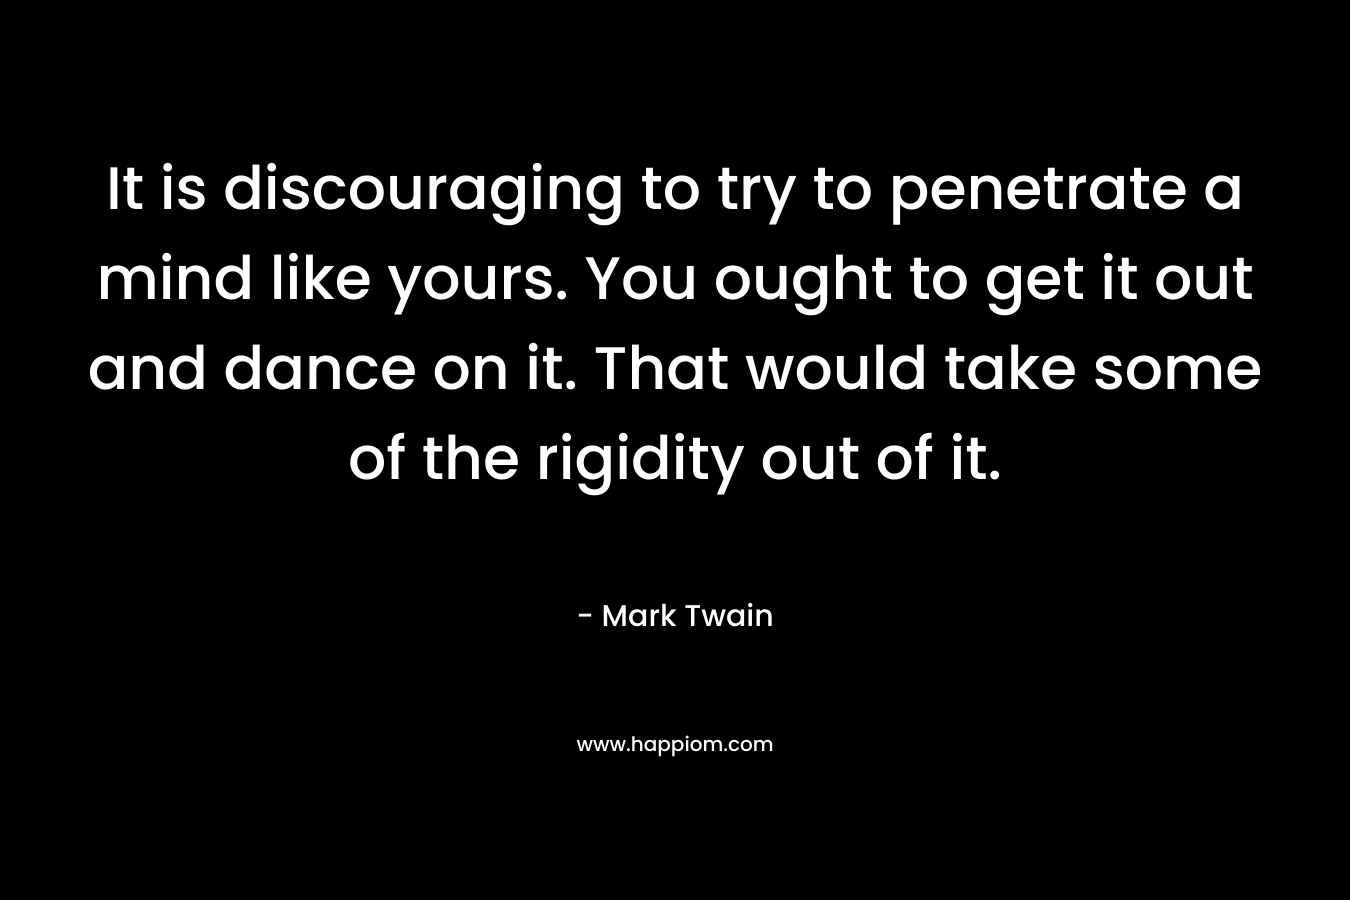 It is discouraging to try to penetrate a mind like yours. You ought to get it out and dance on it. That would take some of the rigidity out of it.